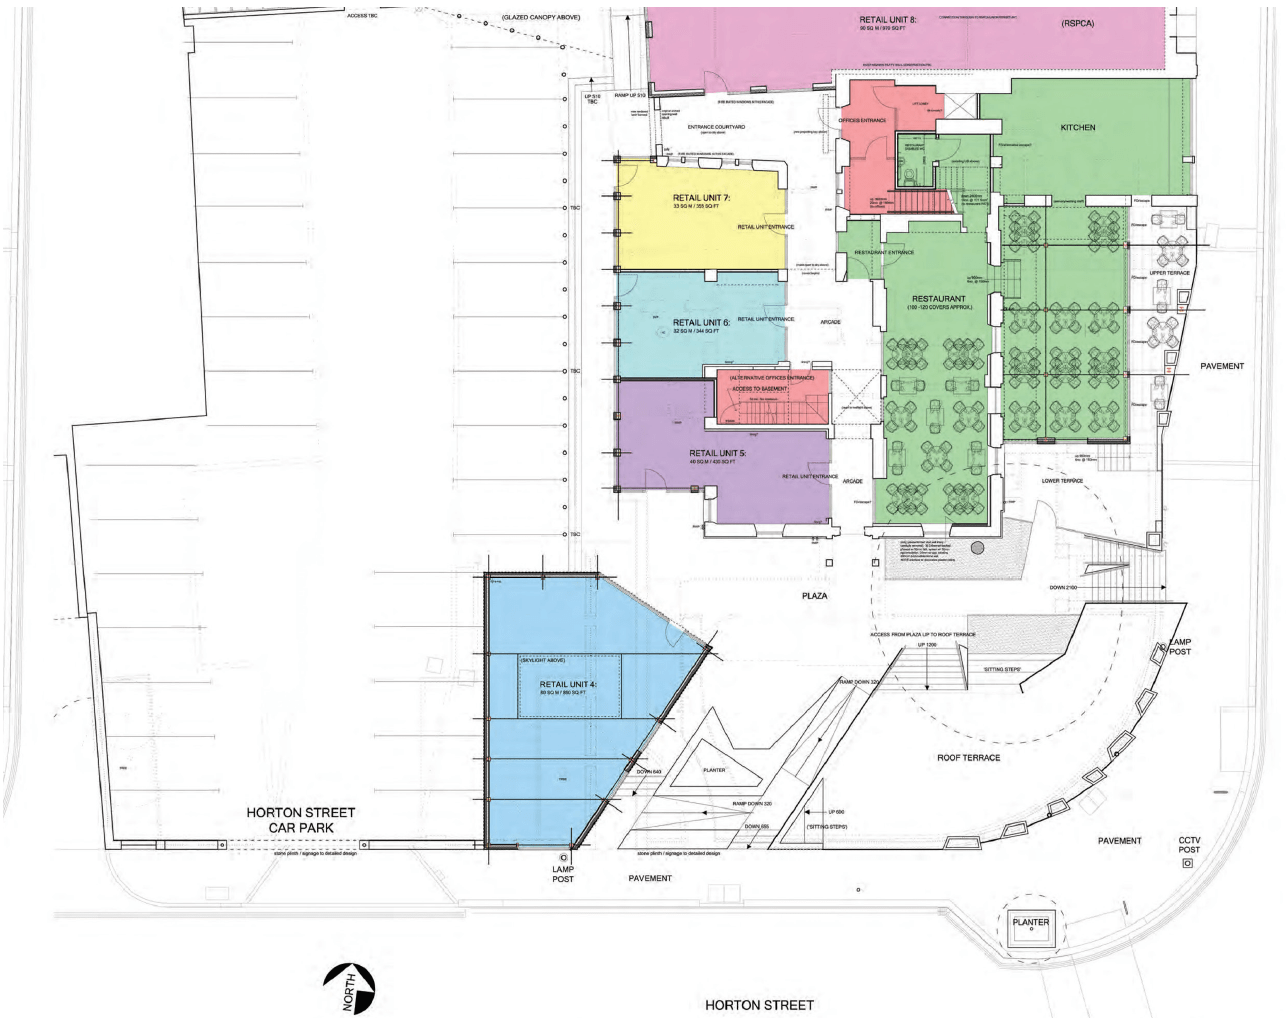 Plan showing proposals for Westgate, to include refurbishment of Horton House, new units and a public plaza